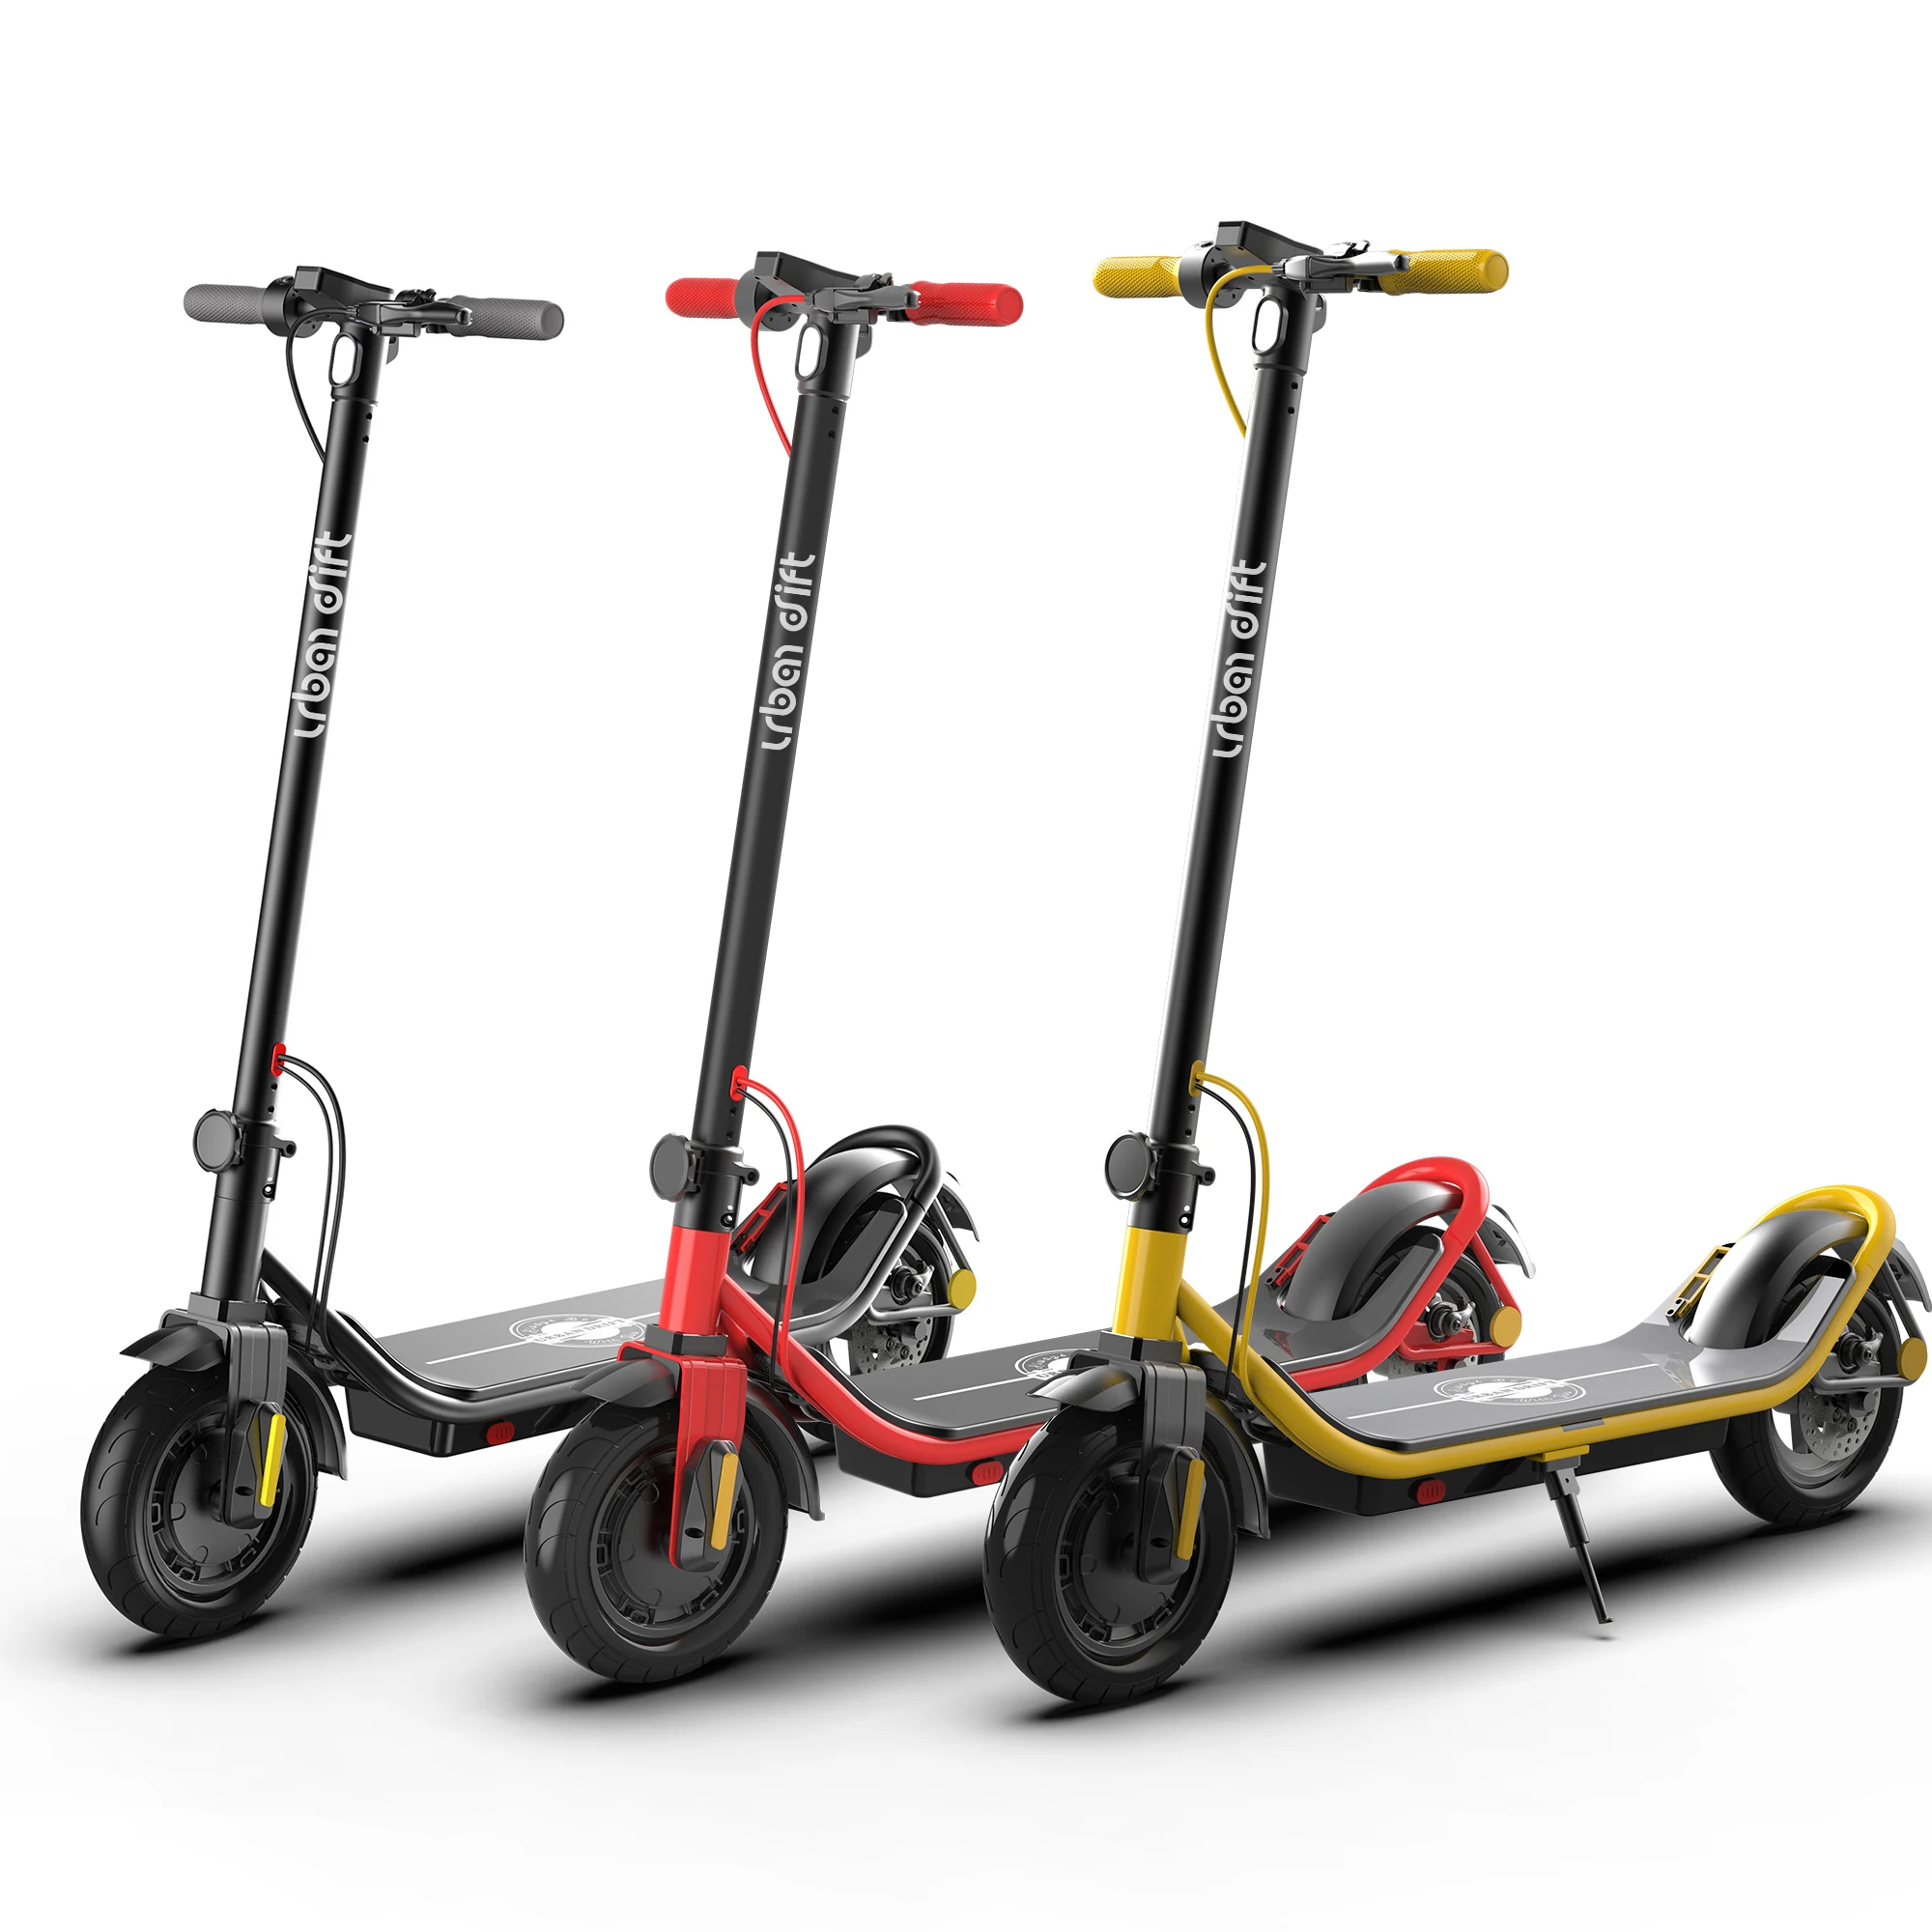 

hot US Stock free shipping Original private model urban drift S006 10inch 350W 10.4ah big tires professional service scooters